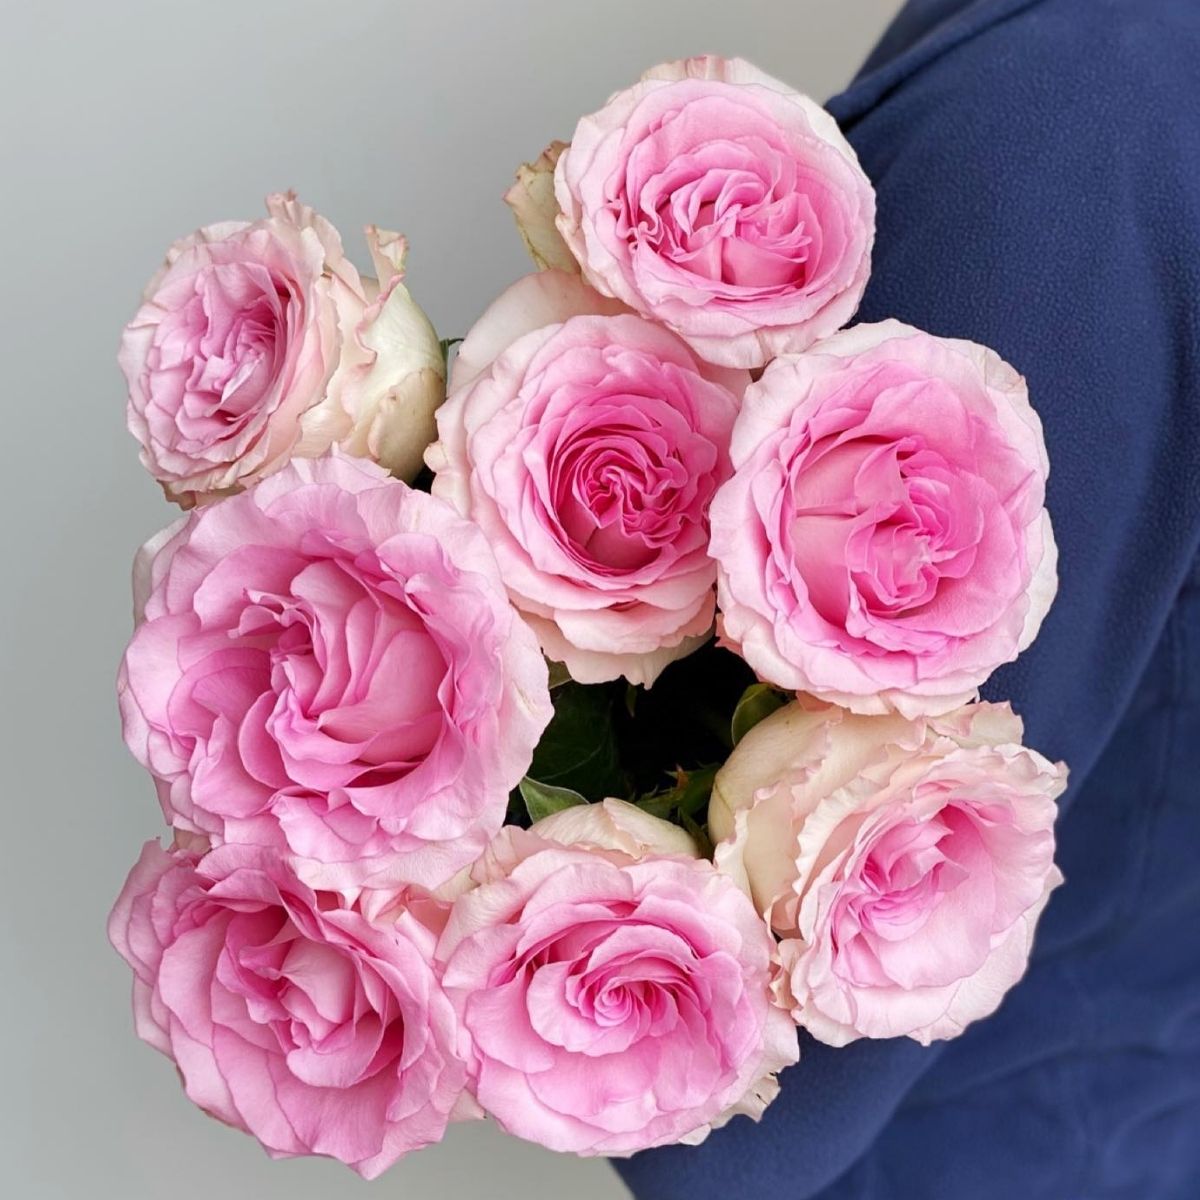 these-9-pink-roses-from-de-ruiter-are-favorites-to-celebrate-mothers-day-2022-featured